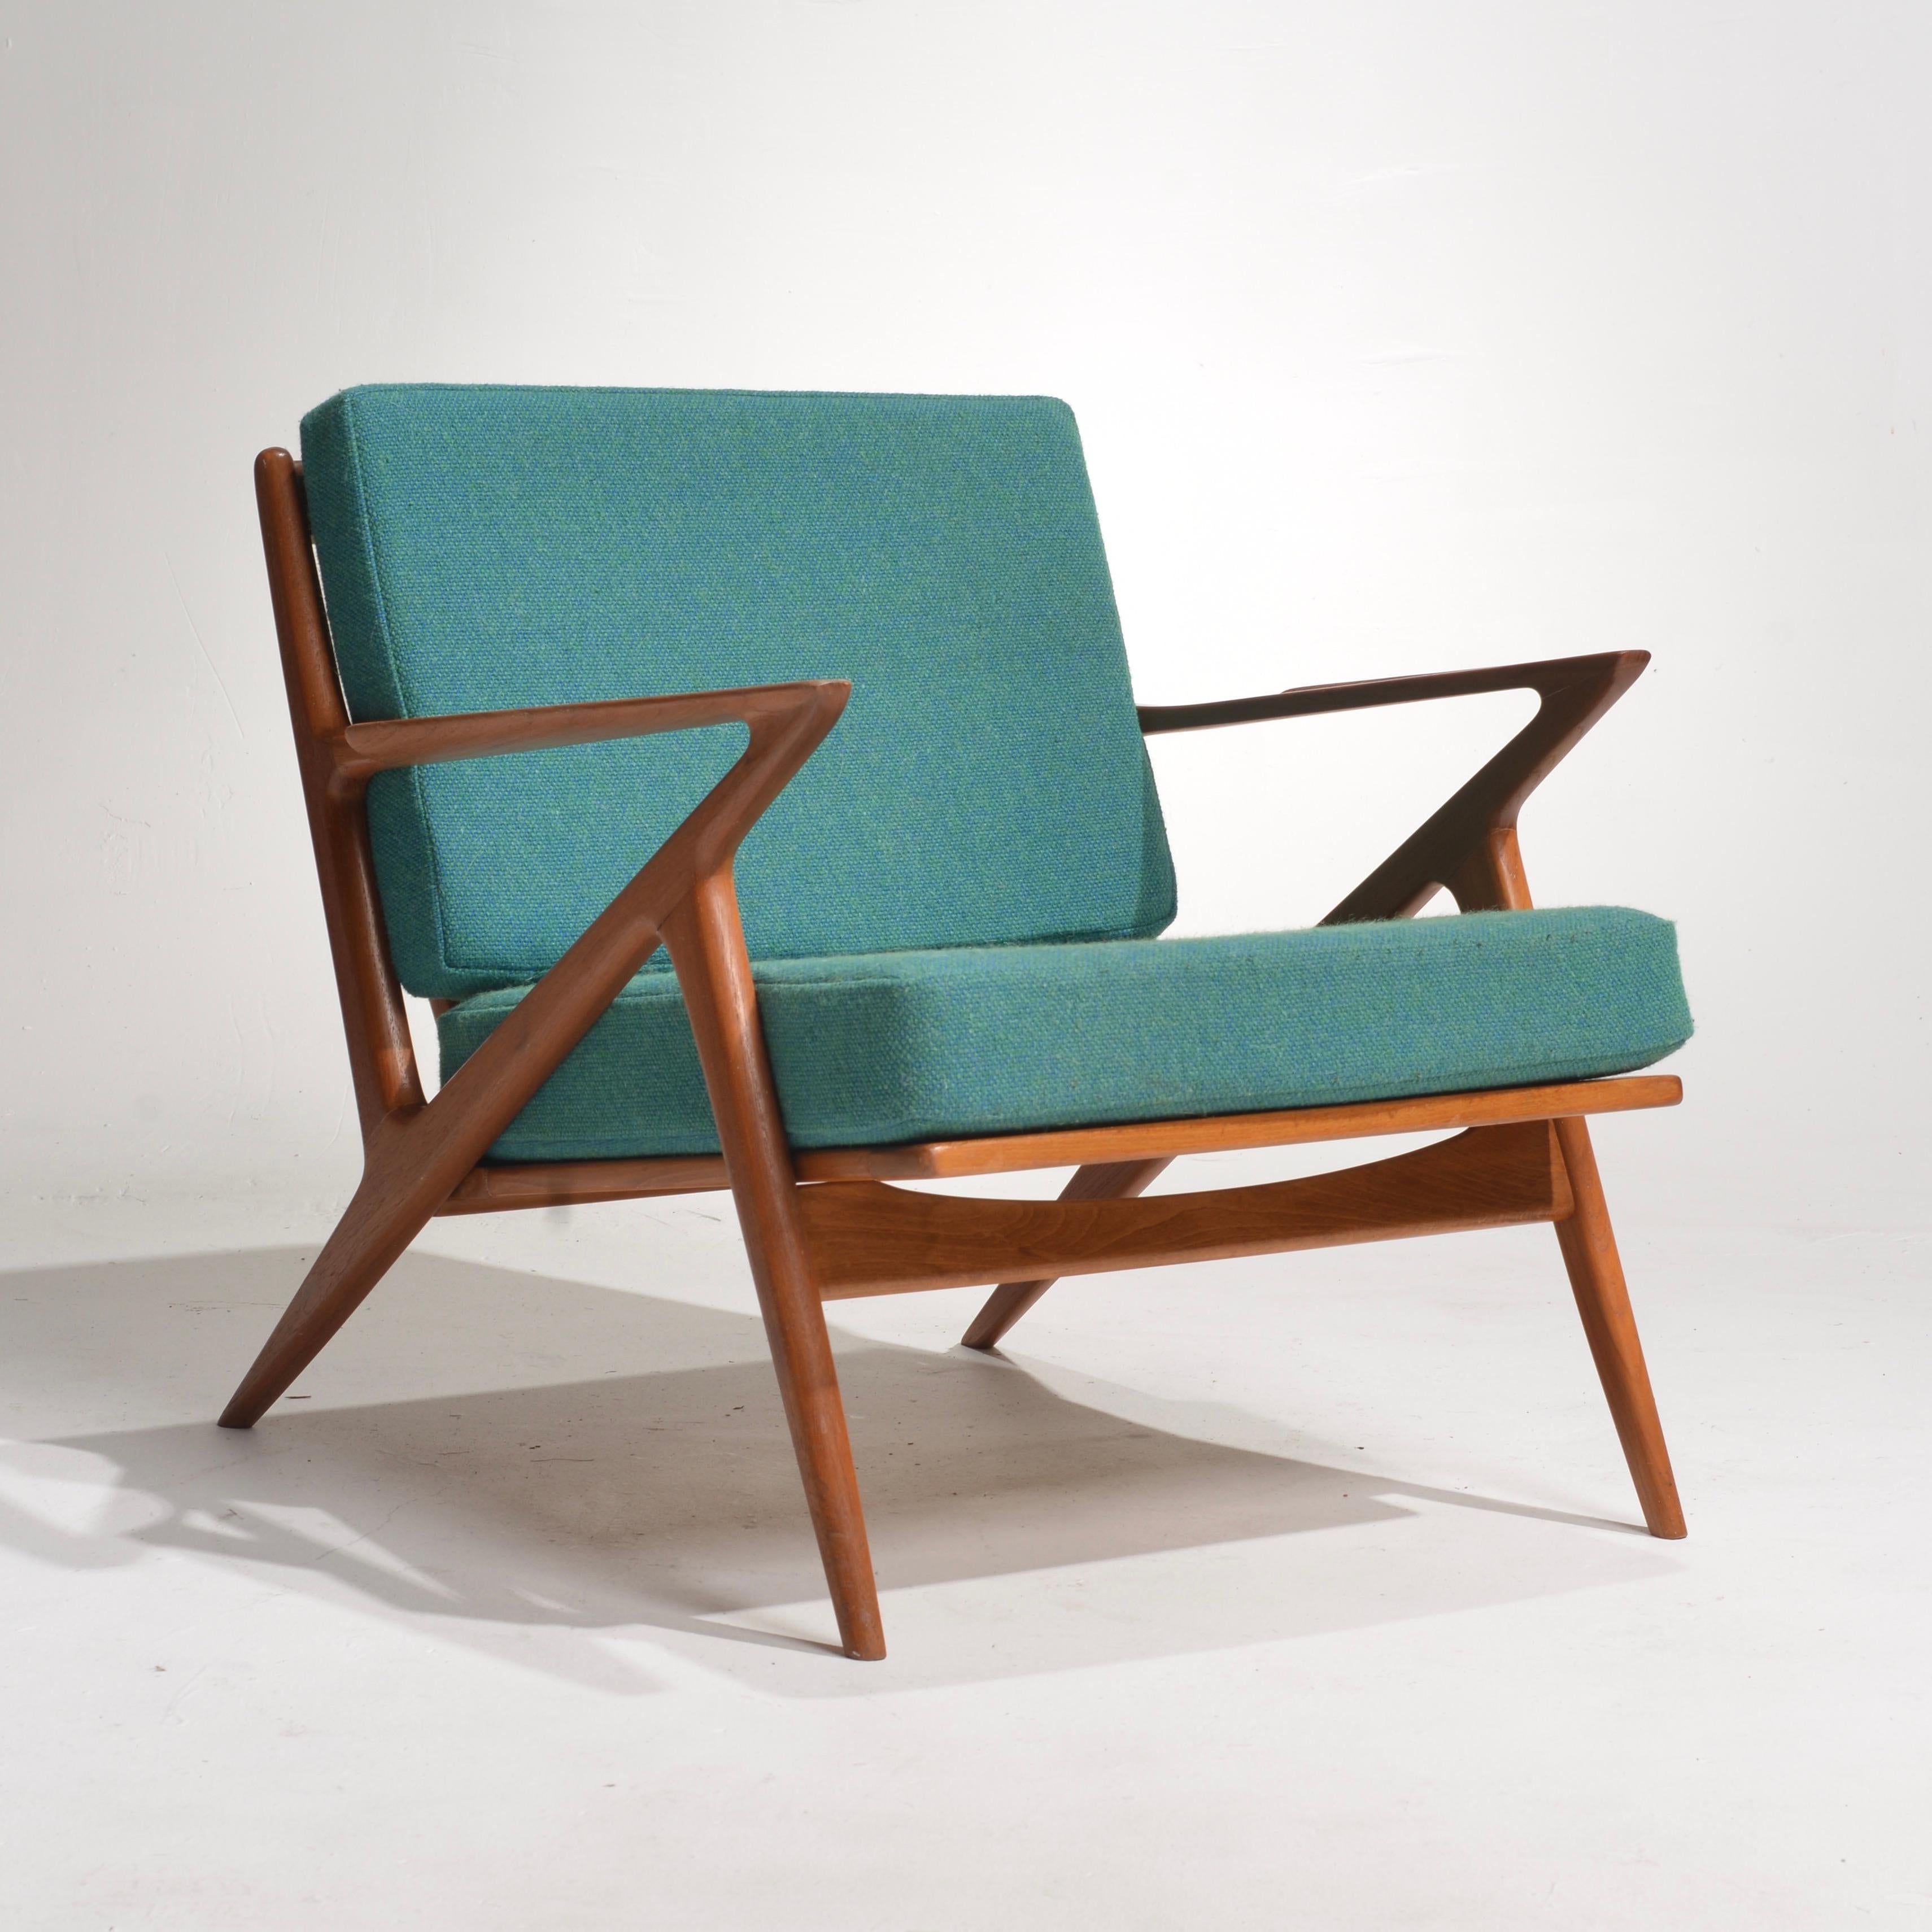 The Teak Z Chair designed by Poul Jensen for Selig features a classic mid-century inspired design, perfect for any style of modern home. This chair is crafted from solid teak wood, giving it a rich and natural warmth and beauty. The signature Z